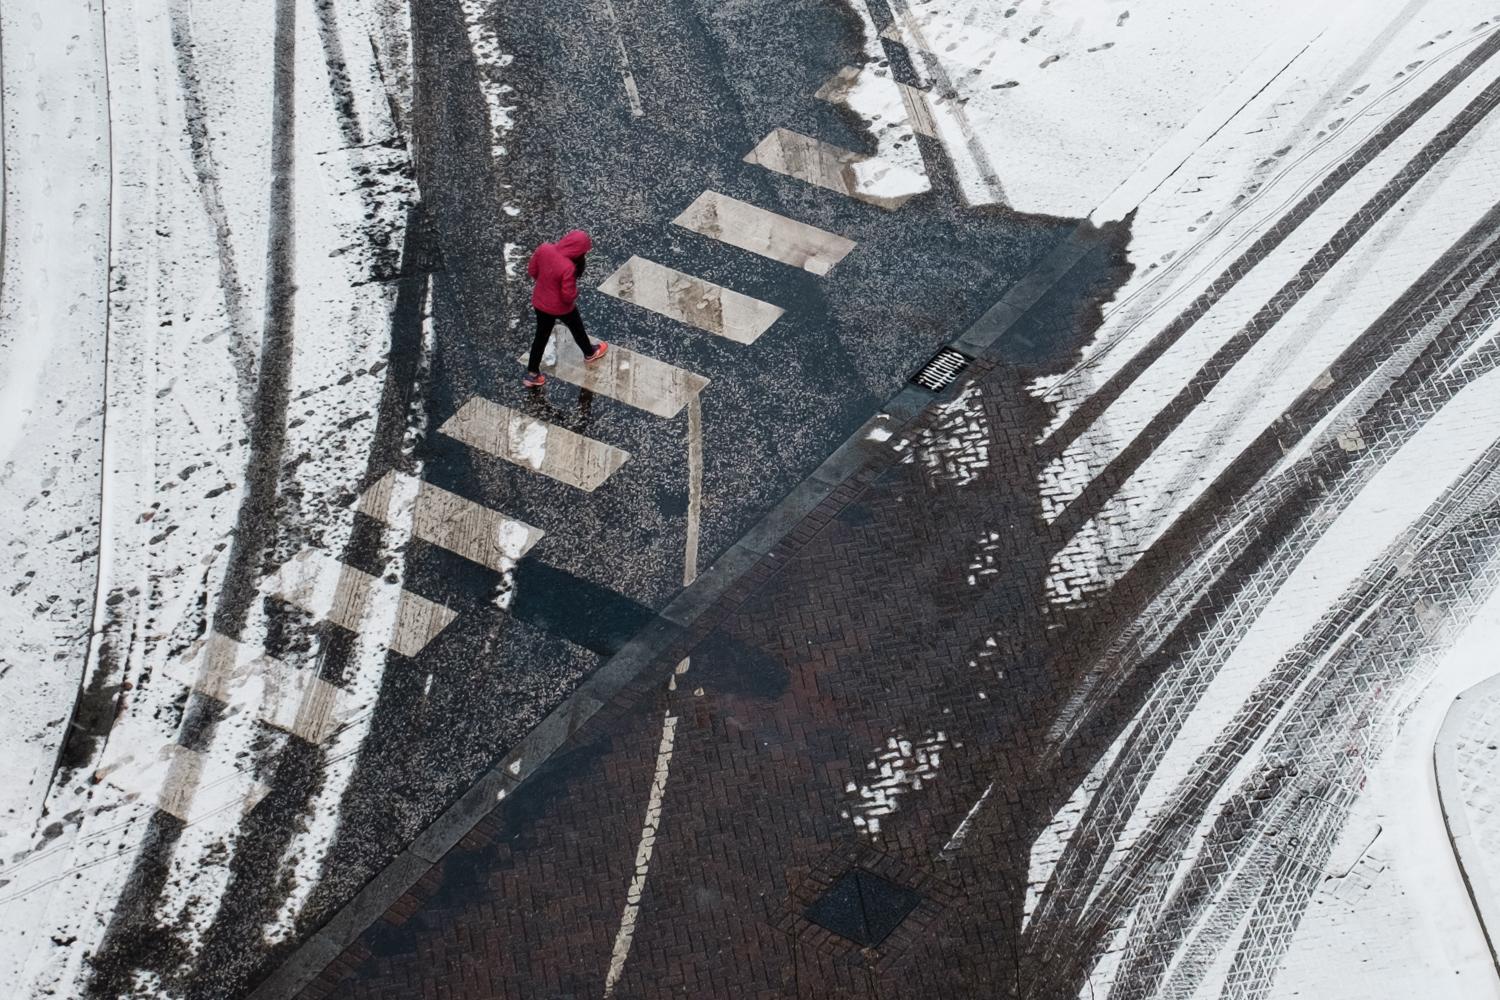 A man in a red coat crossing the road surrounded by snow